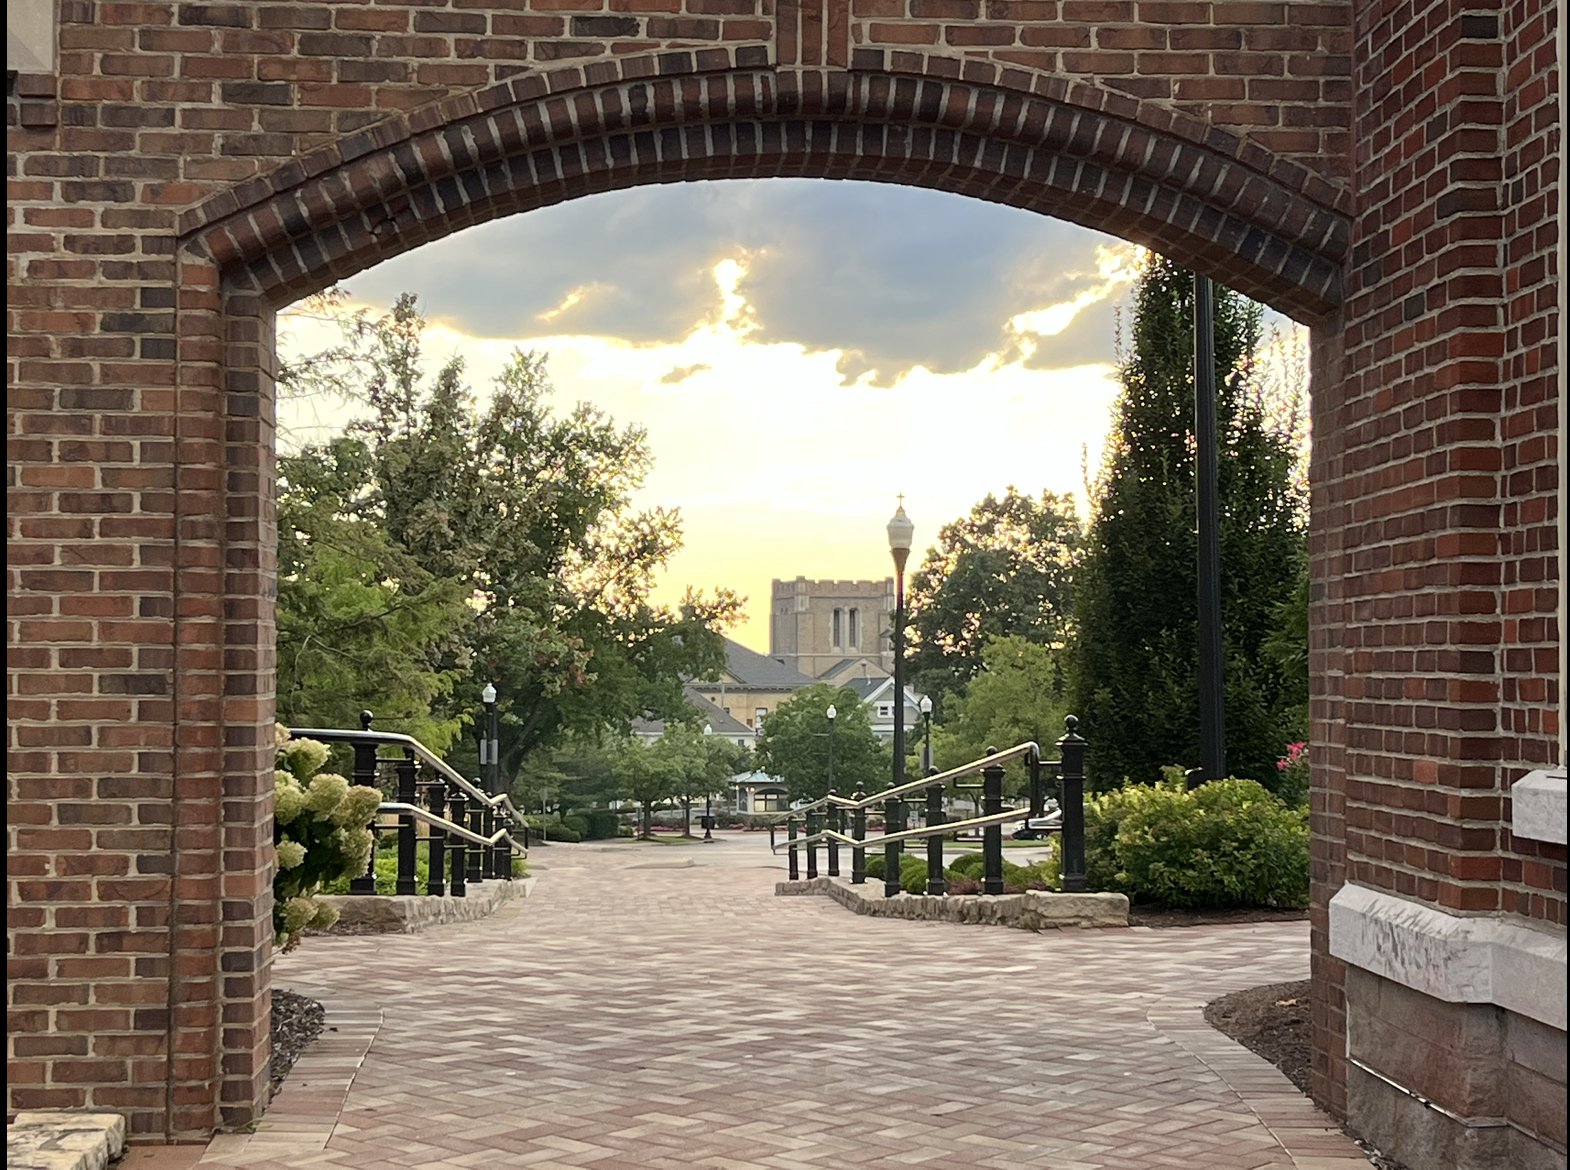 Archway Between Saint Joseph Hall and Chapel on Campus